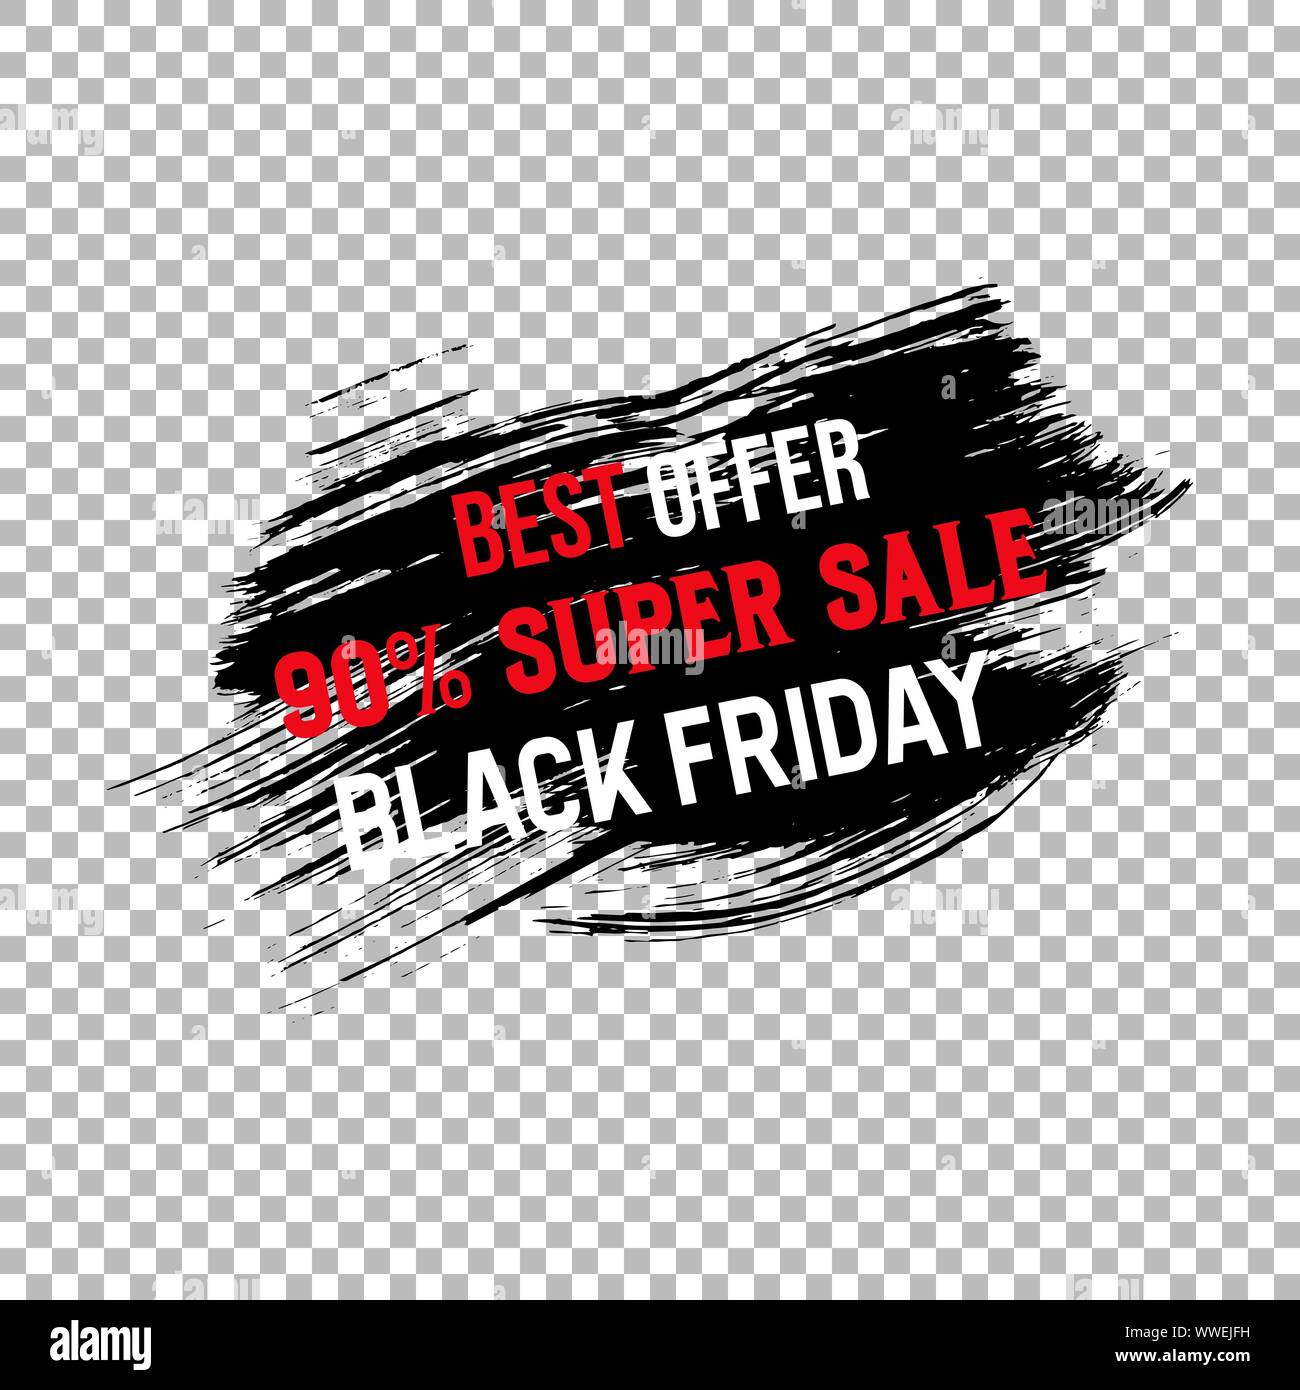 https://c8.alamy.com/comp/WWEJFH/black-friday-clearance-sale-banner-template-seasonal-wholesale-shopping-event-advertising-limited-time-offer-promotion-poster-element-ink-brush-stroke-with-typography-on-transparent-background-WWEJFH.jpg